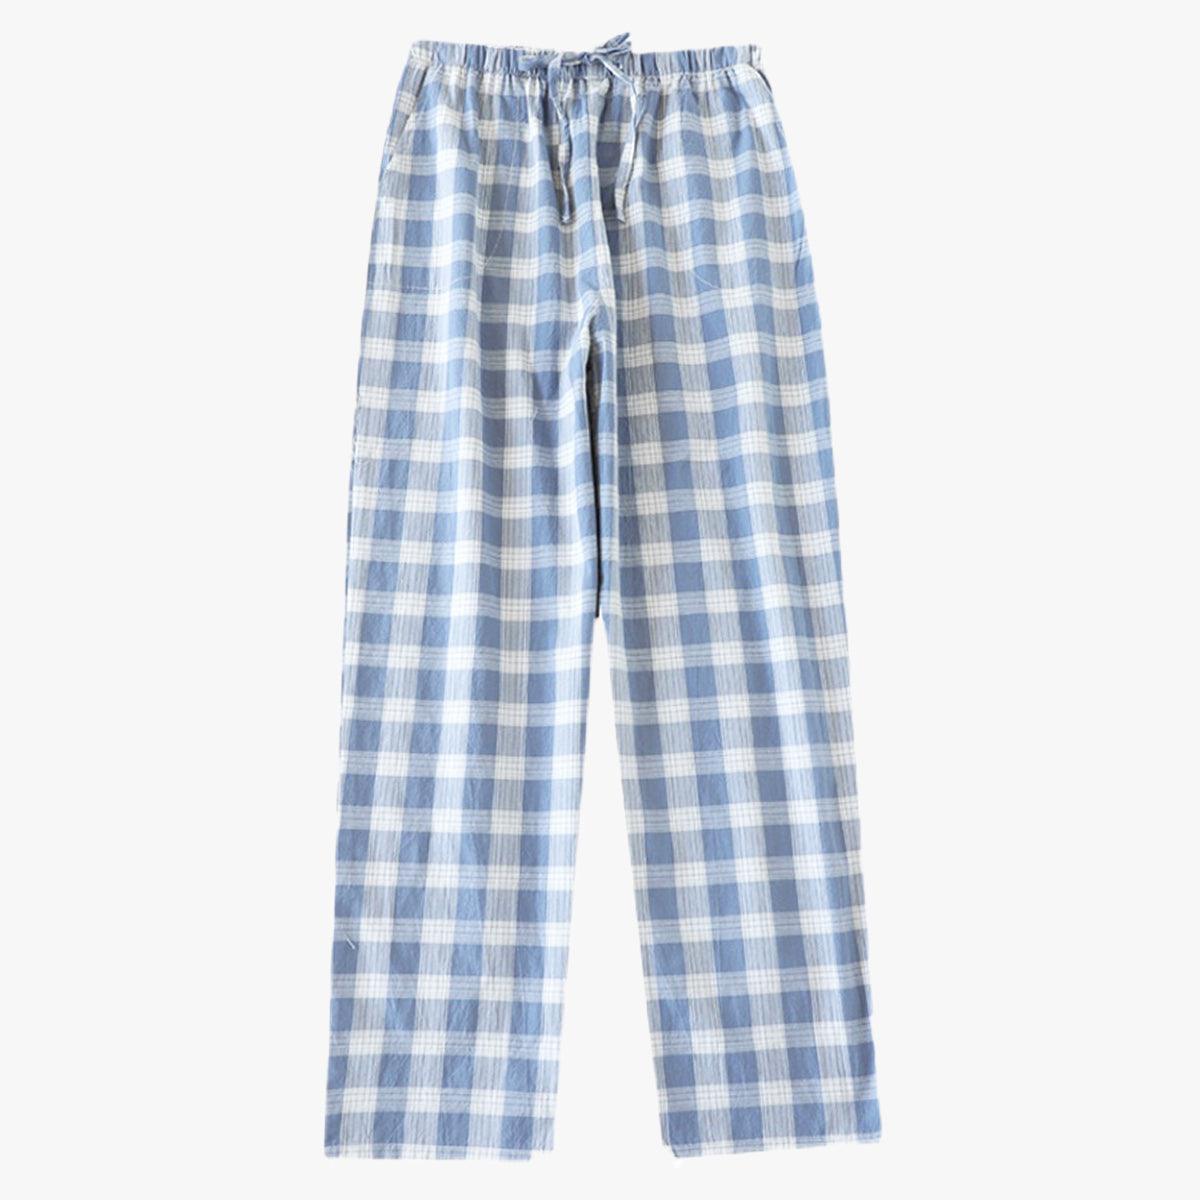 Blue pants with squares